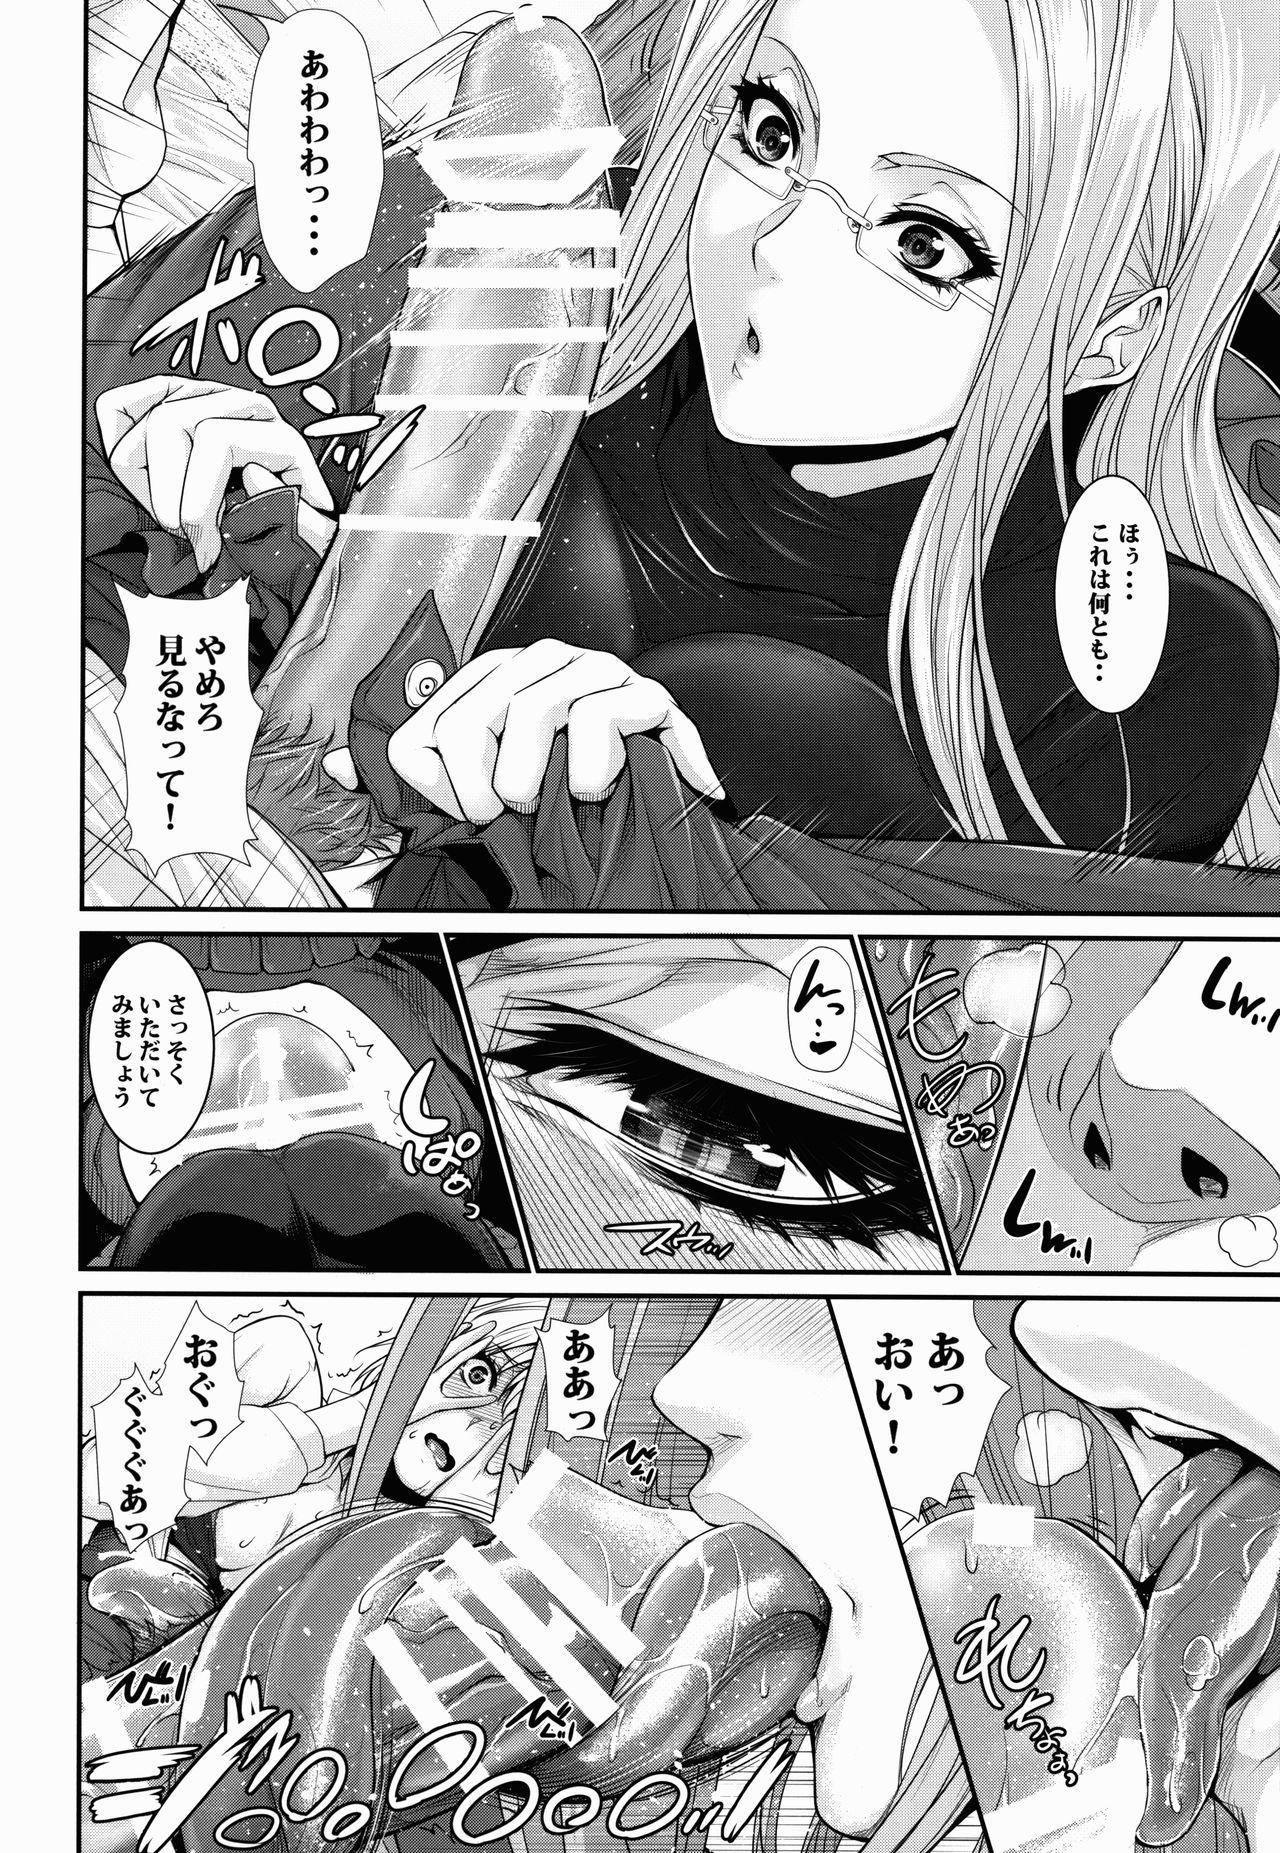 Belly Shirou-kun Harem!! Servant Hen - Fate stay night Fate hollow ataraxia Free Blowjobs - Page 10